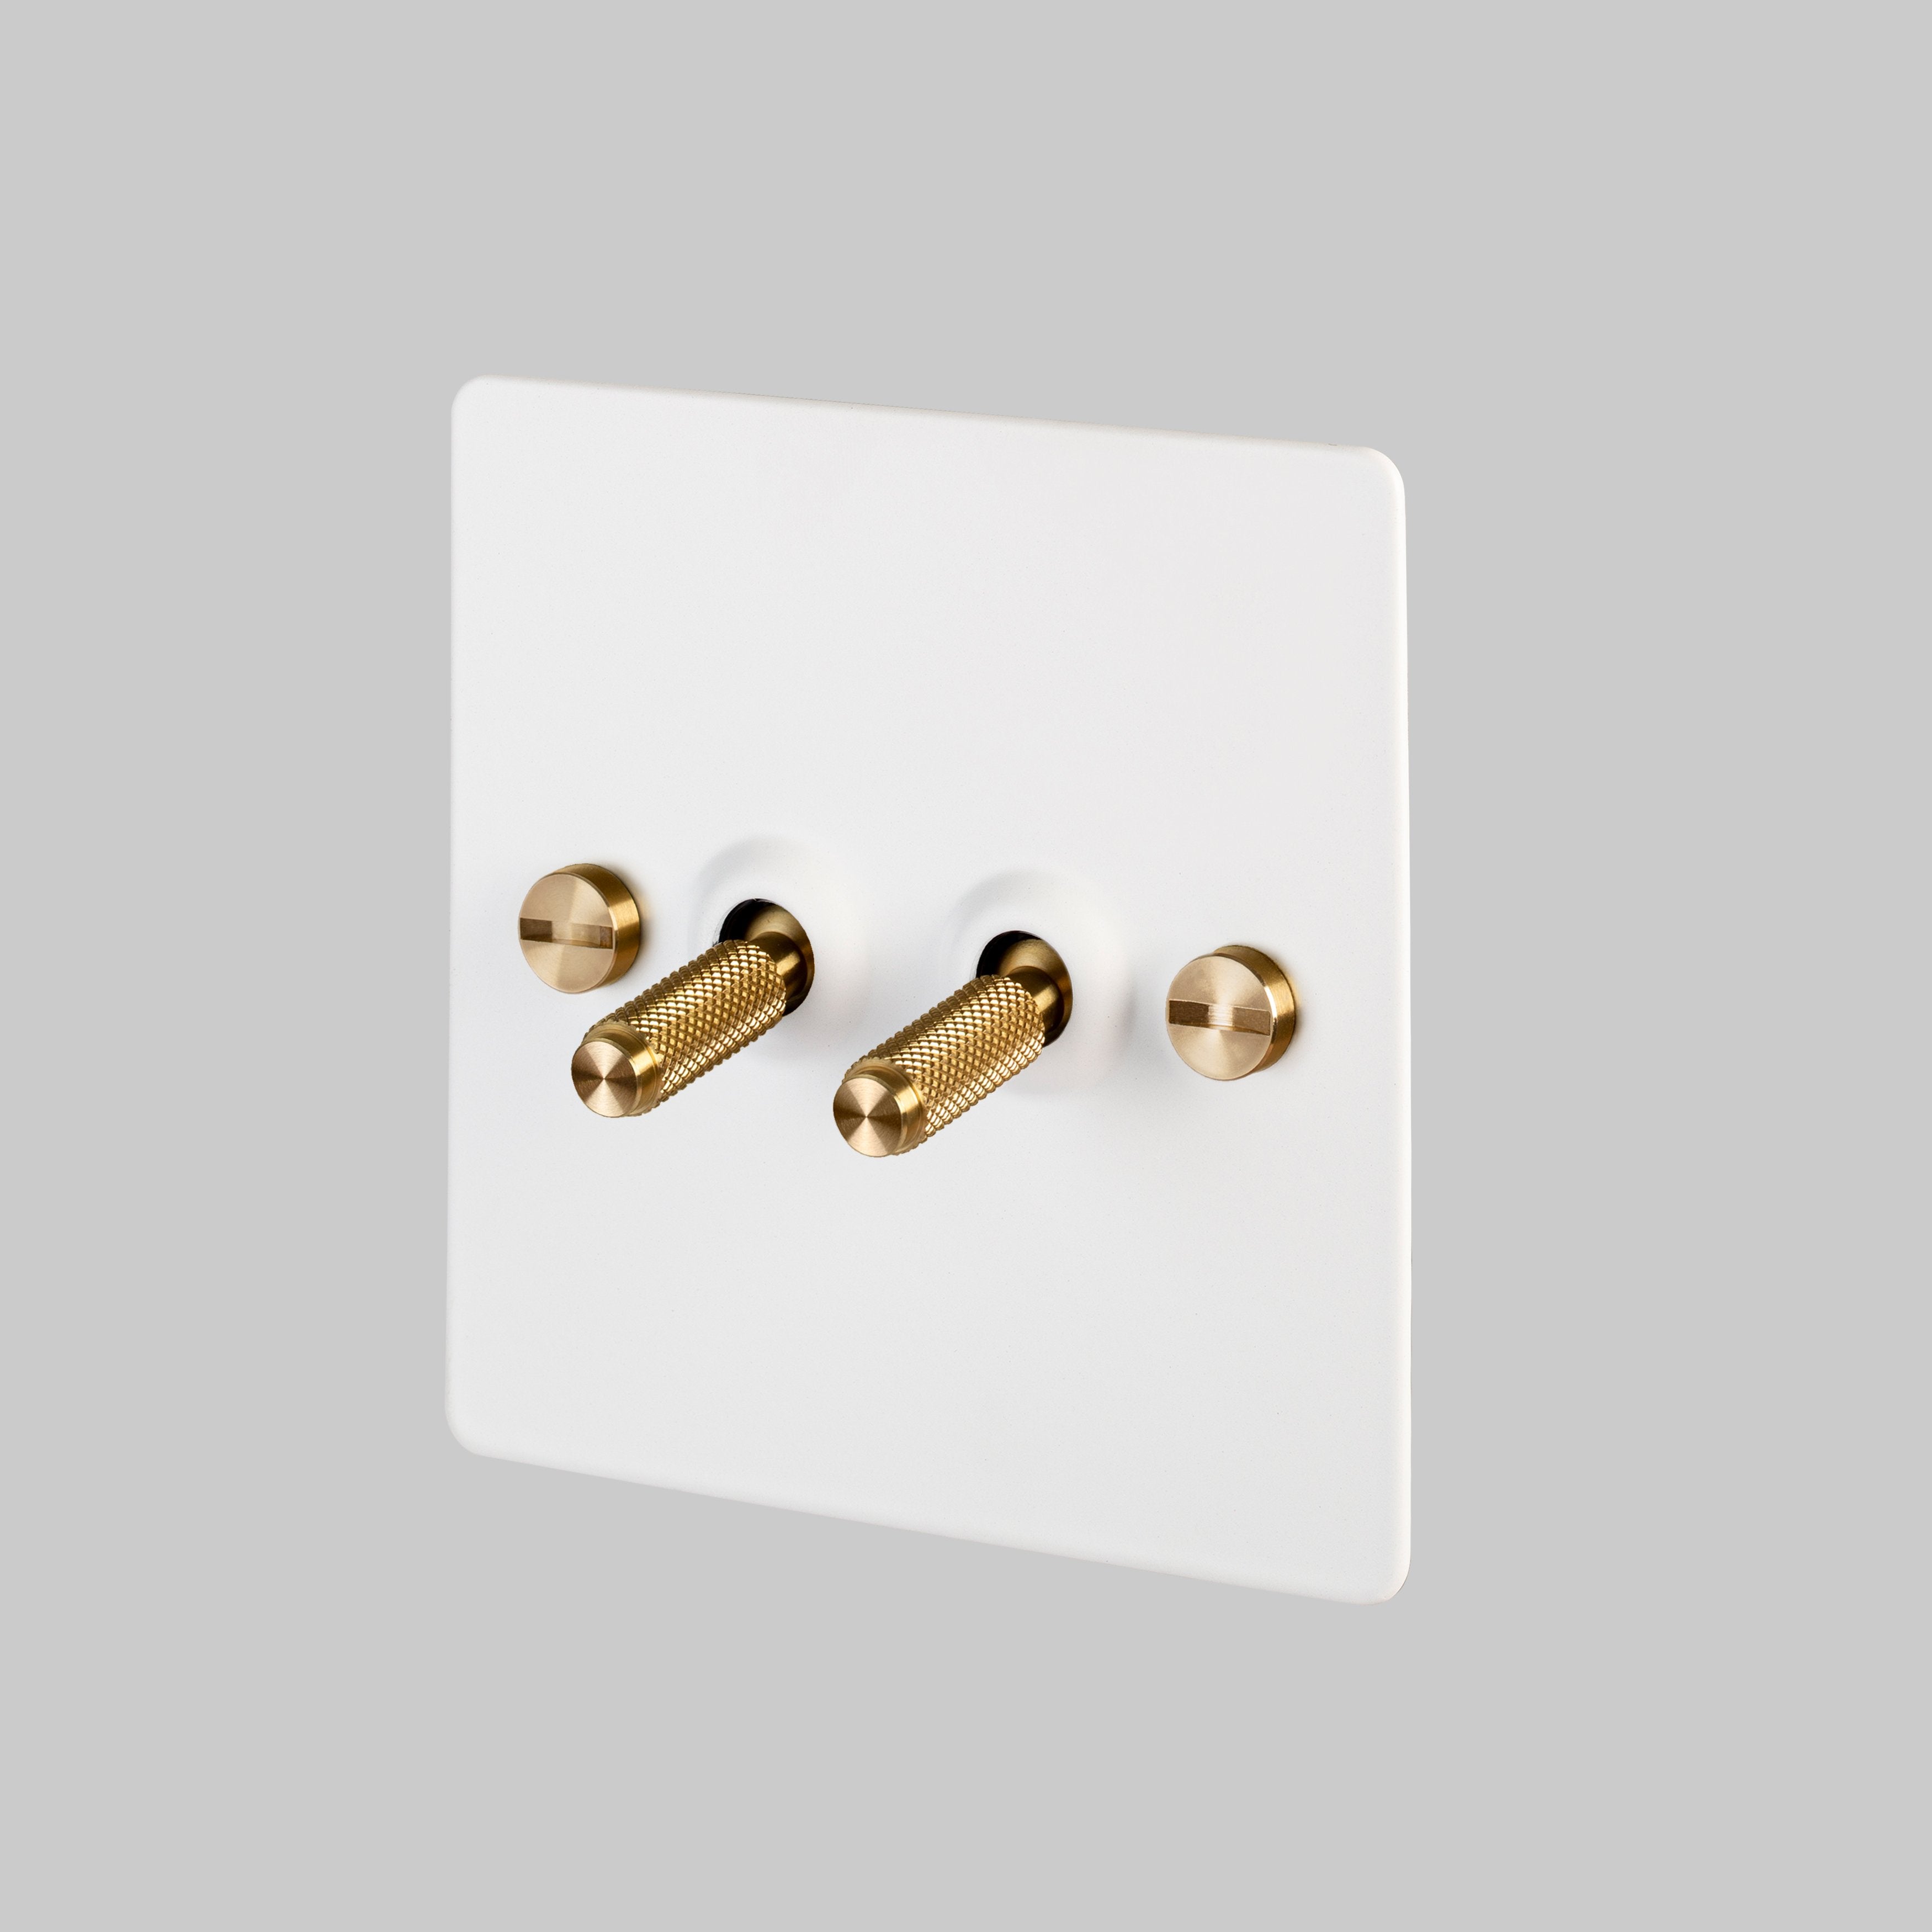 Buster and Punch 2G TOGGLE SWITCH / WHITE / BRASS - No.42 Interiors